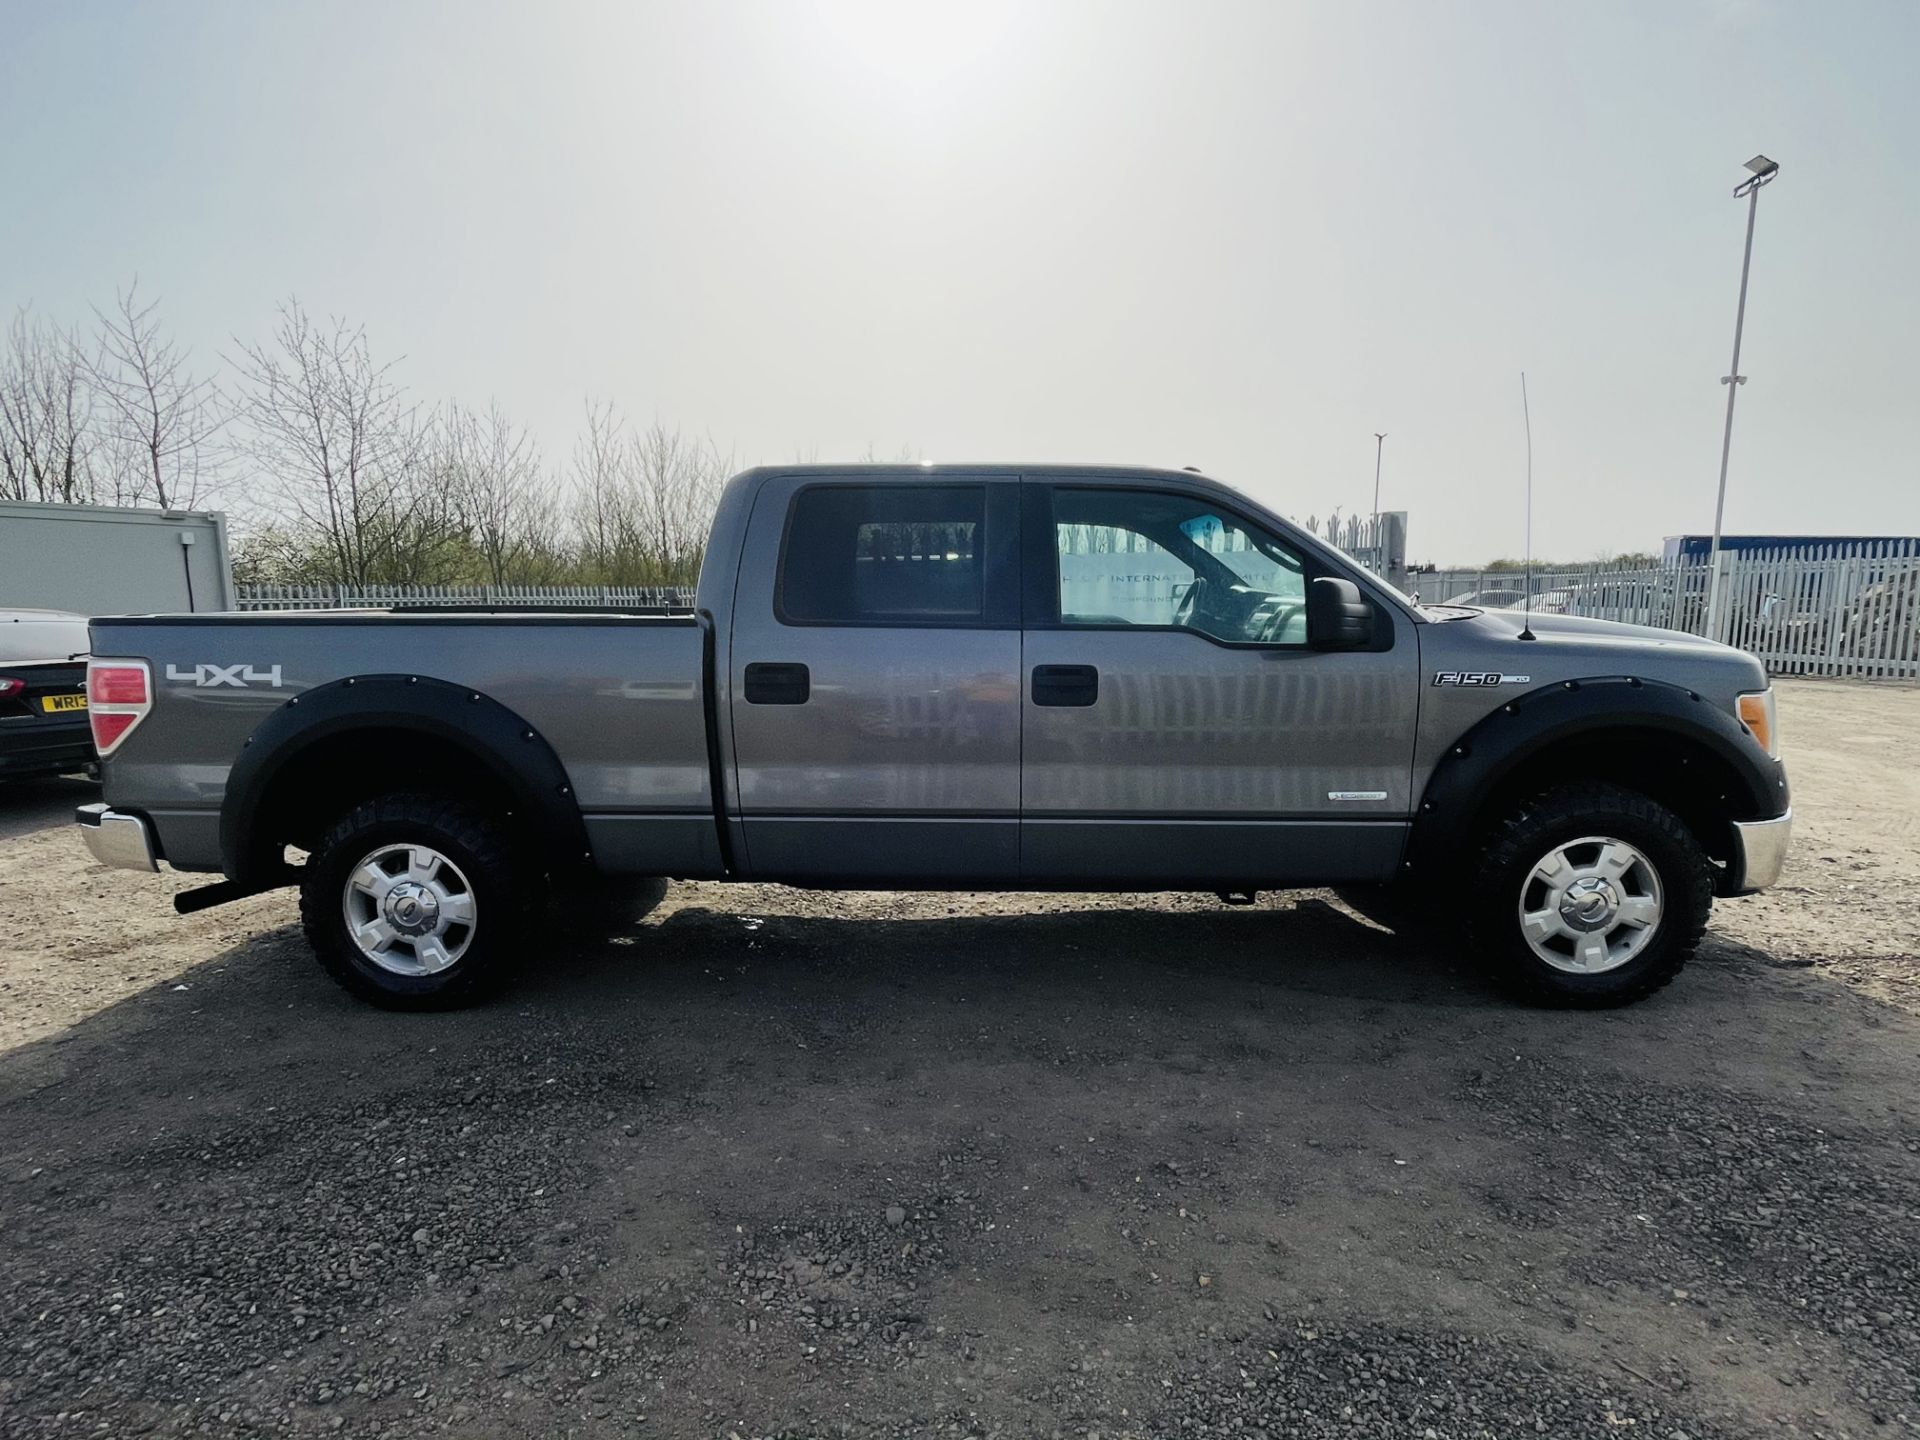 Ford F-150 XLT Edition 3.5L V6 Eco-boost Super-Crew 4x4 - '2012 Year' - Air Con - No Vat save 20% - Image 10 of 25